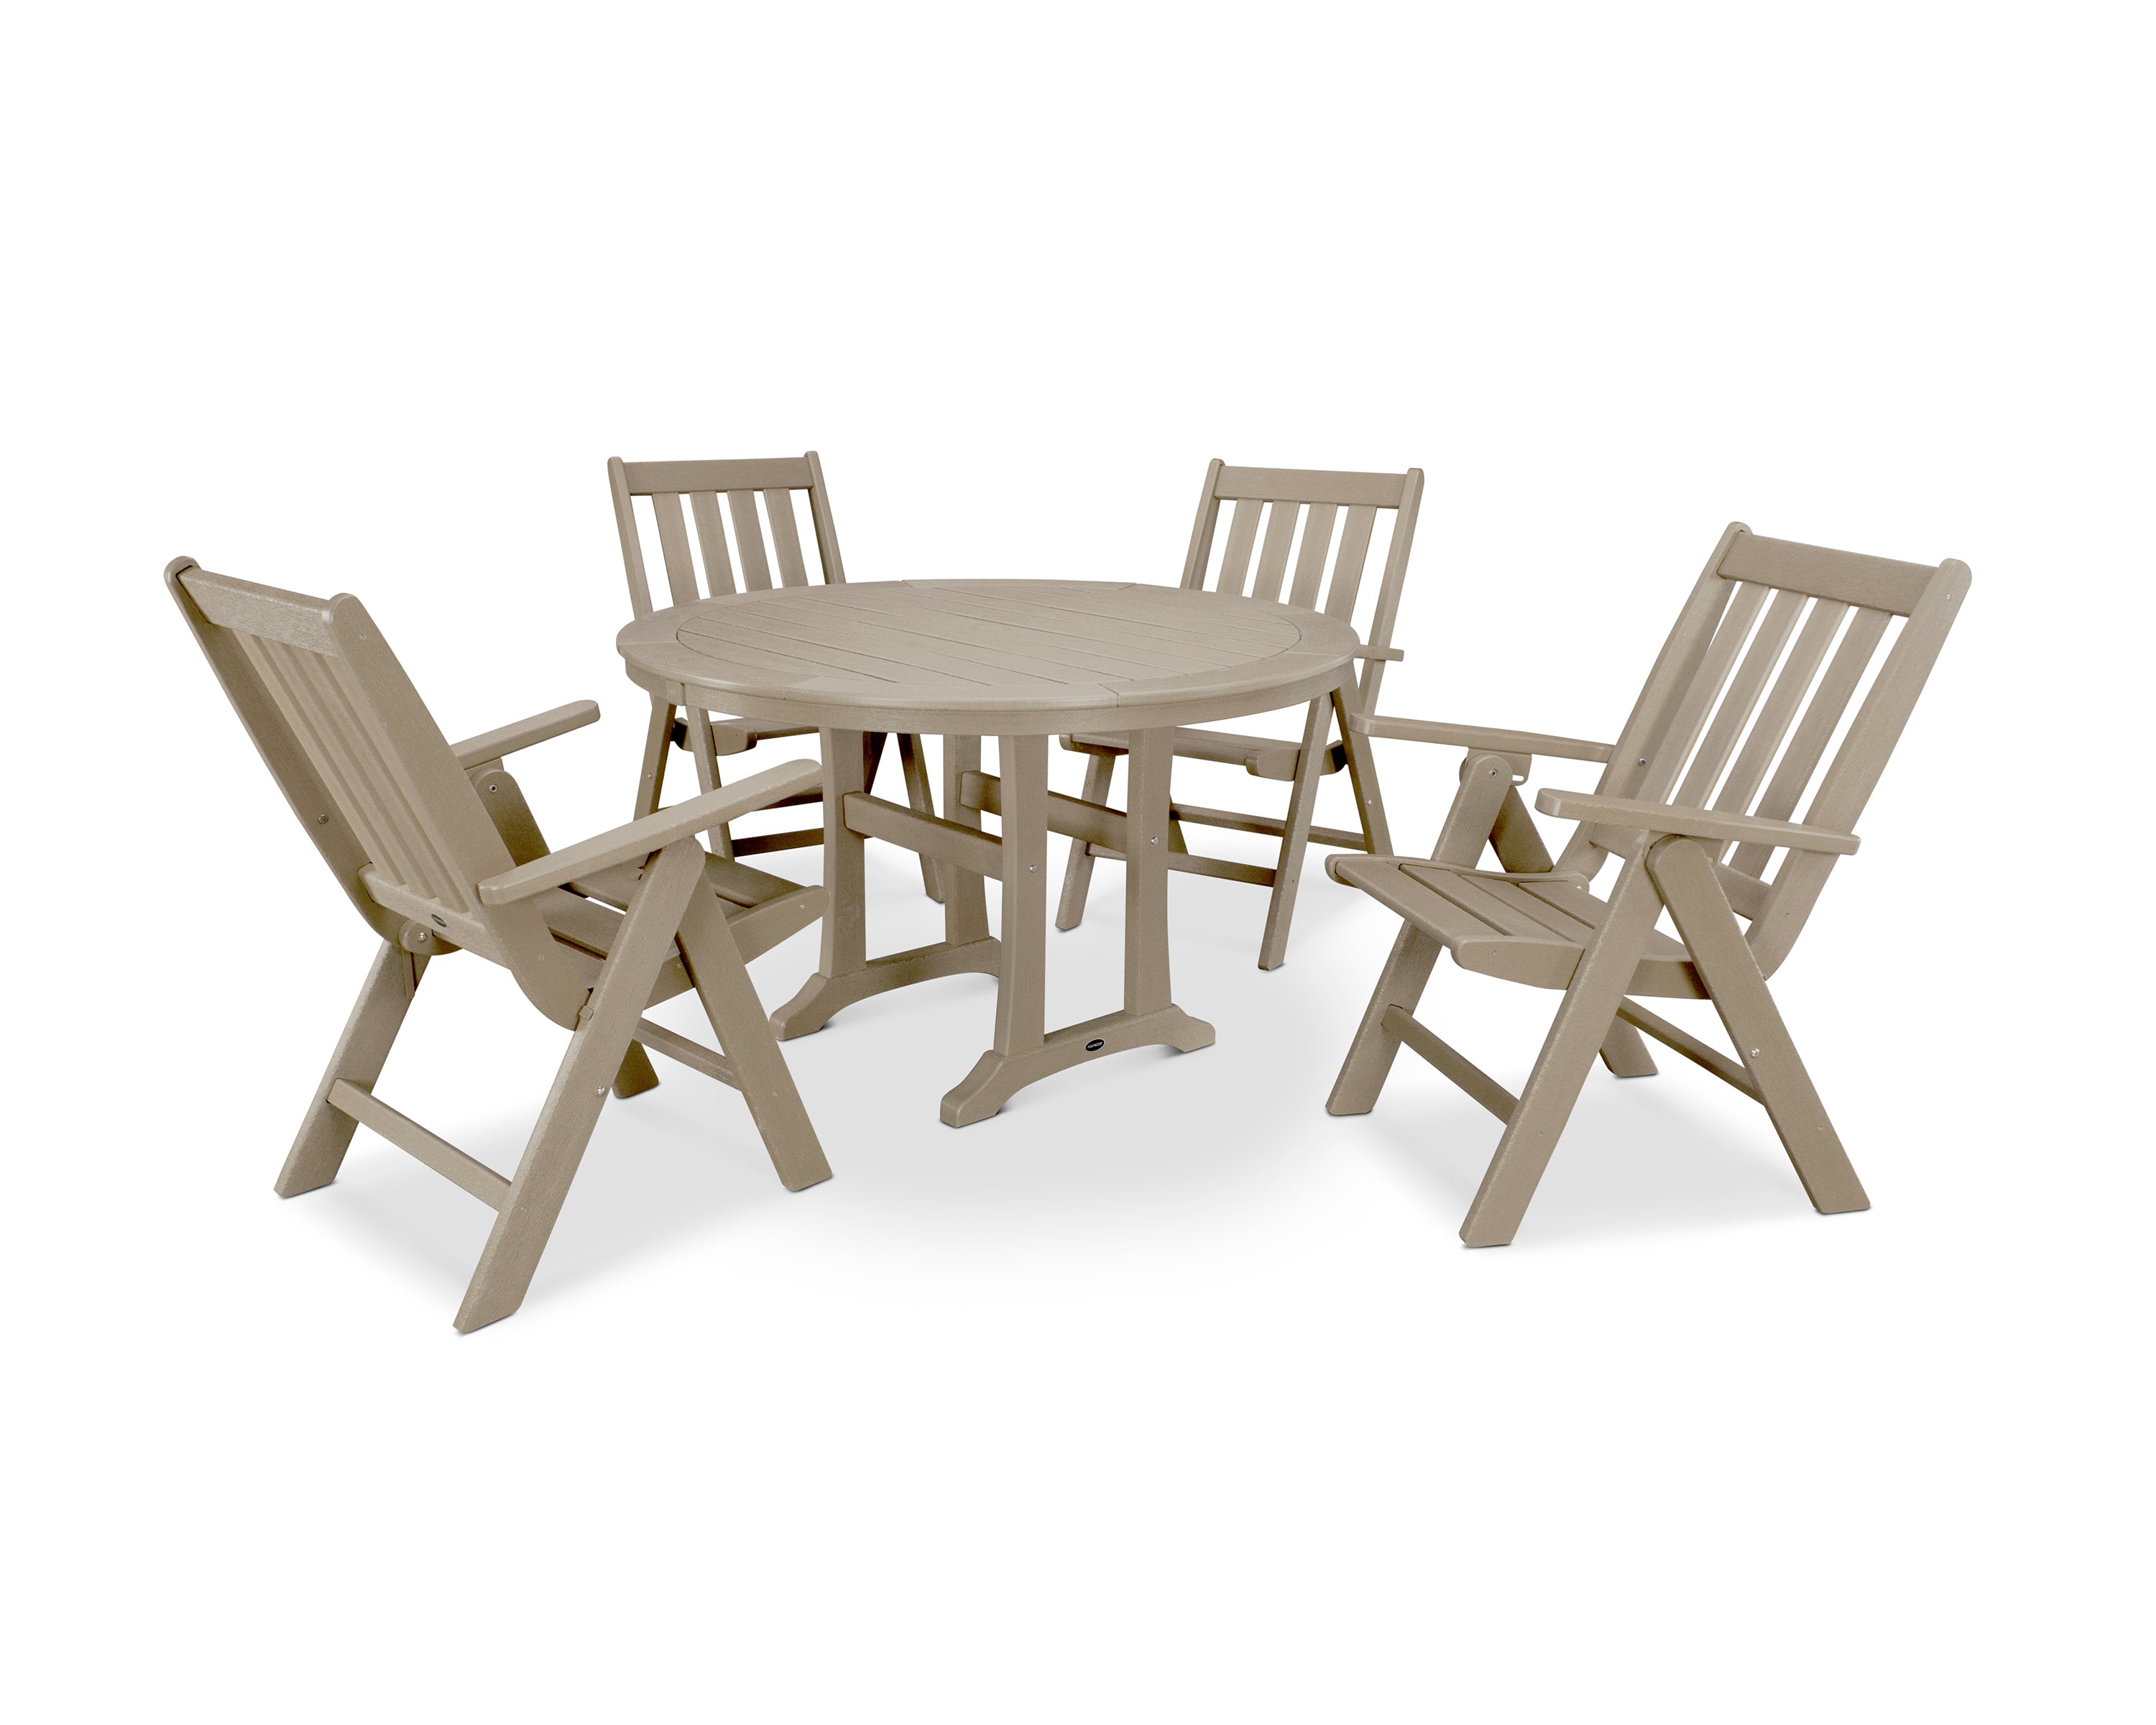 POLYWOOD® Vineyard Folding Chair 5-Piece Round Dining Set with Trestle Legs in Vintage Sahara